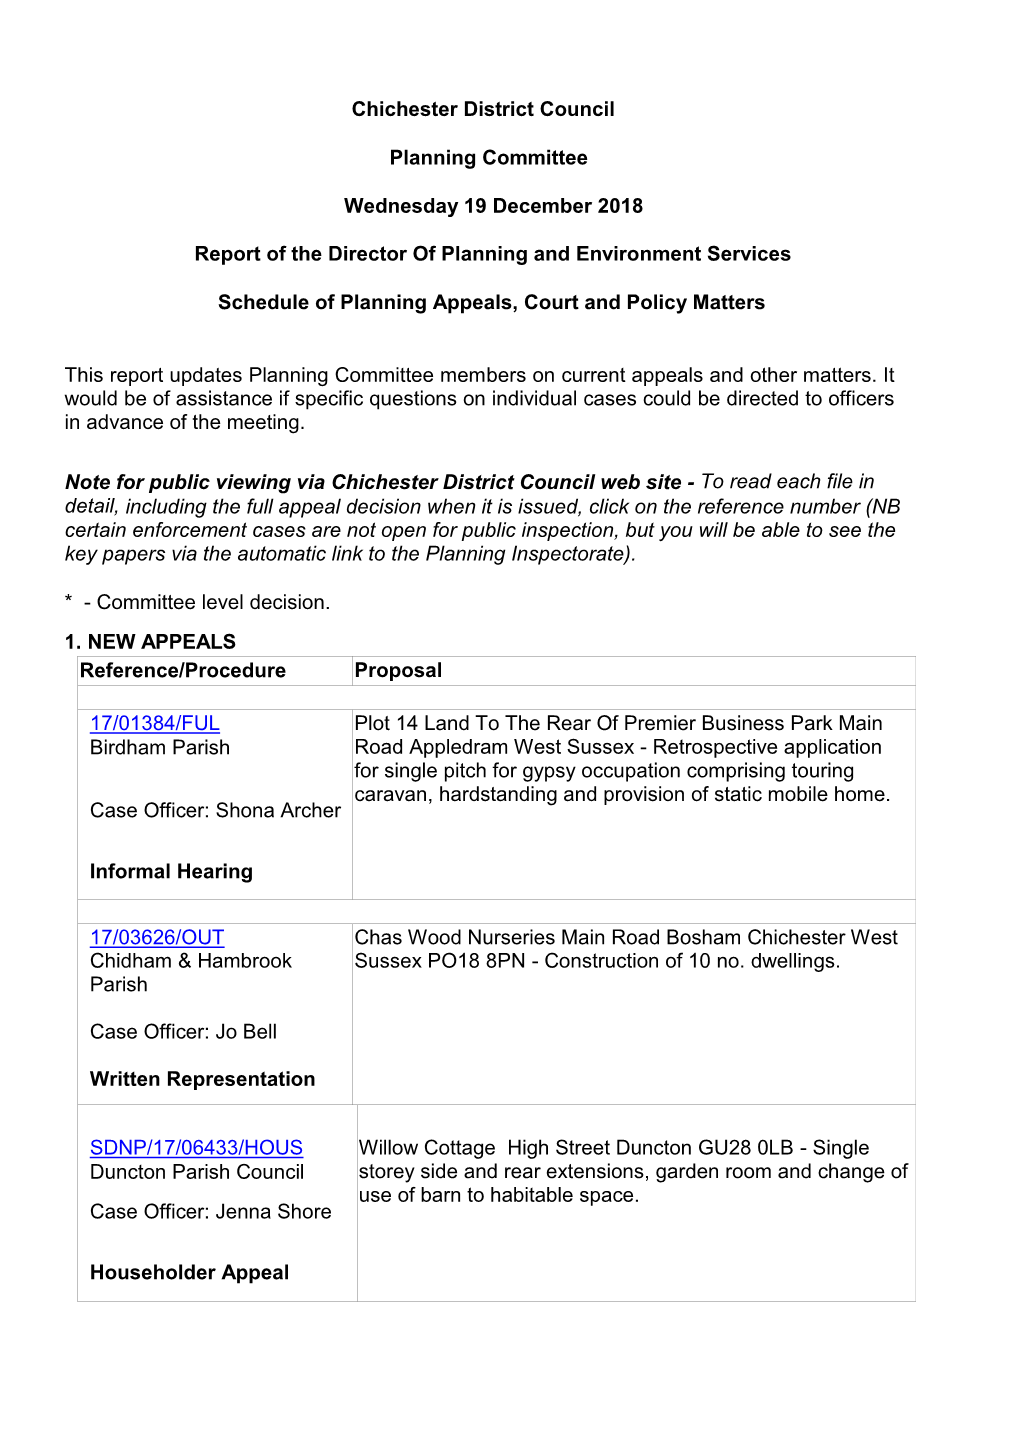 Chichester District Council Planning Committee Wednesday 19 December 2018 Report of the Director of Planning and Environment